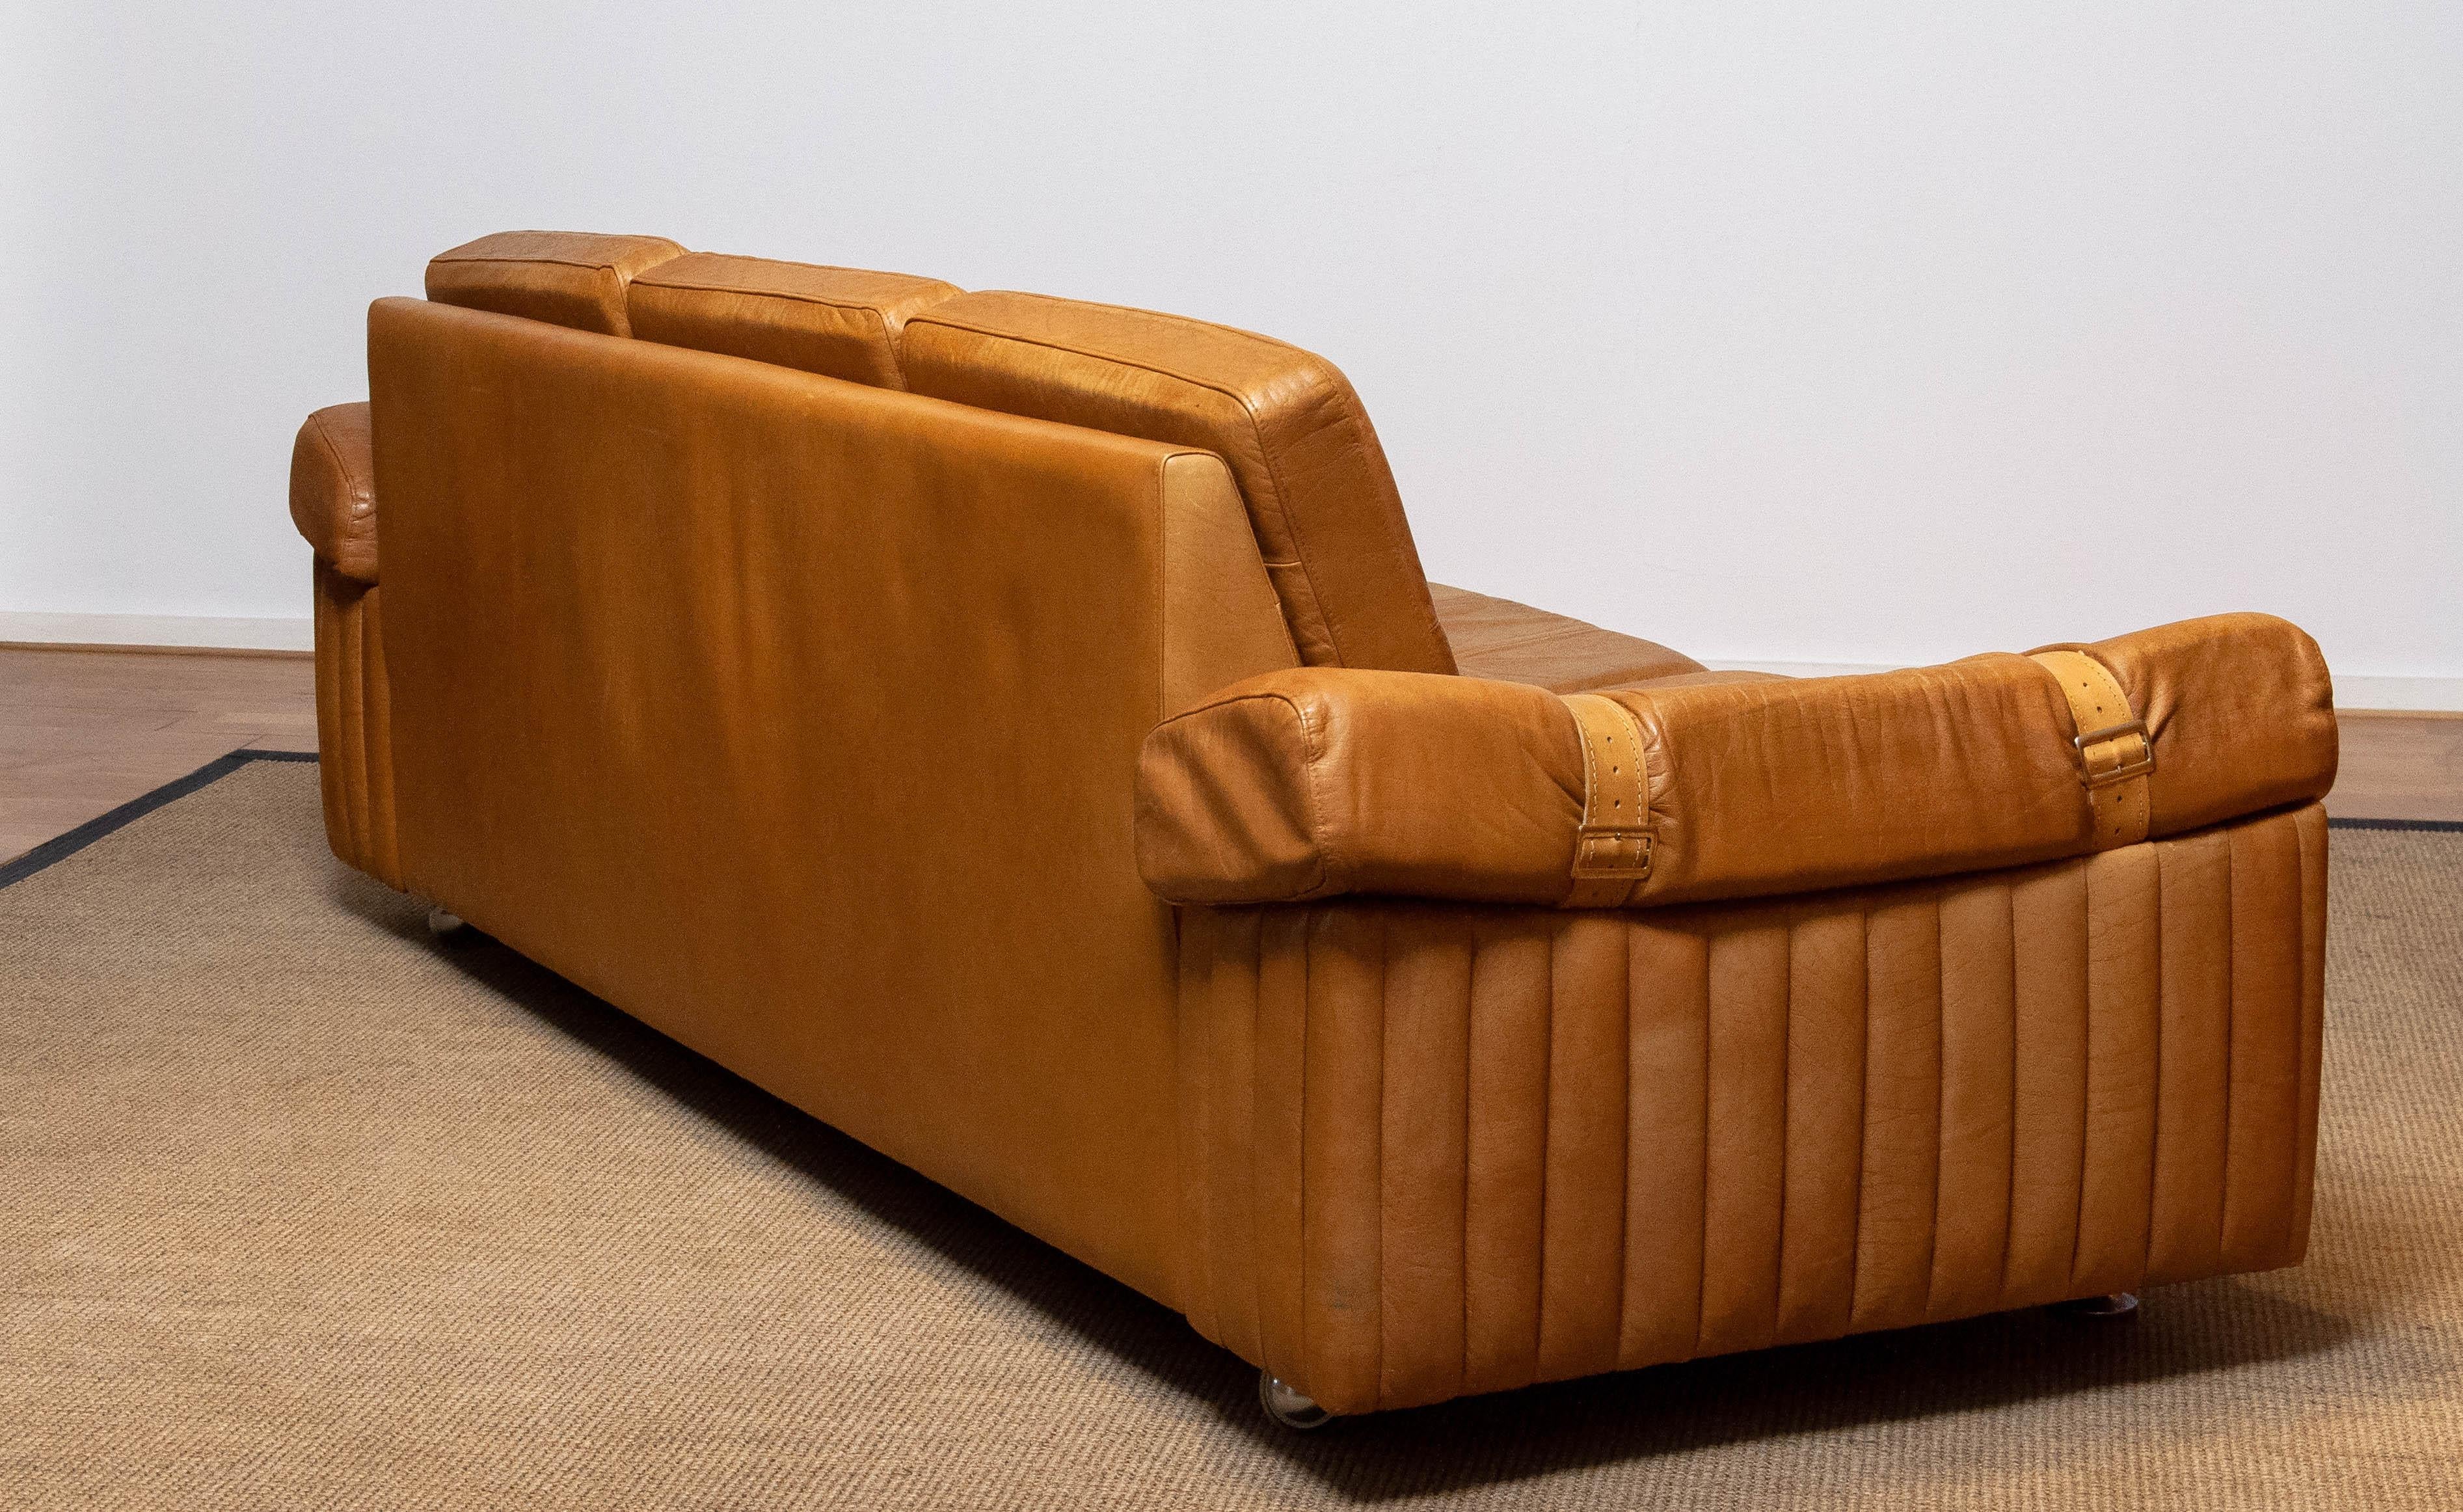 1970s Scandinavian Brutalist Three-Seater Low-Back Sofa in Camel Colored Leather For Sale 4